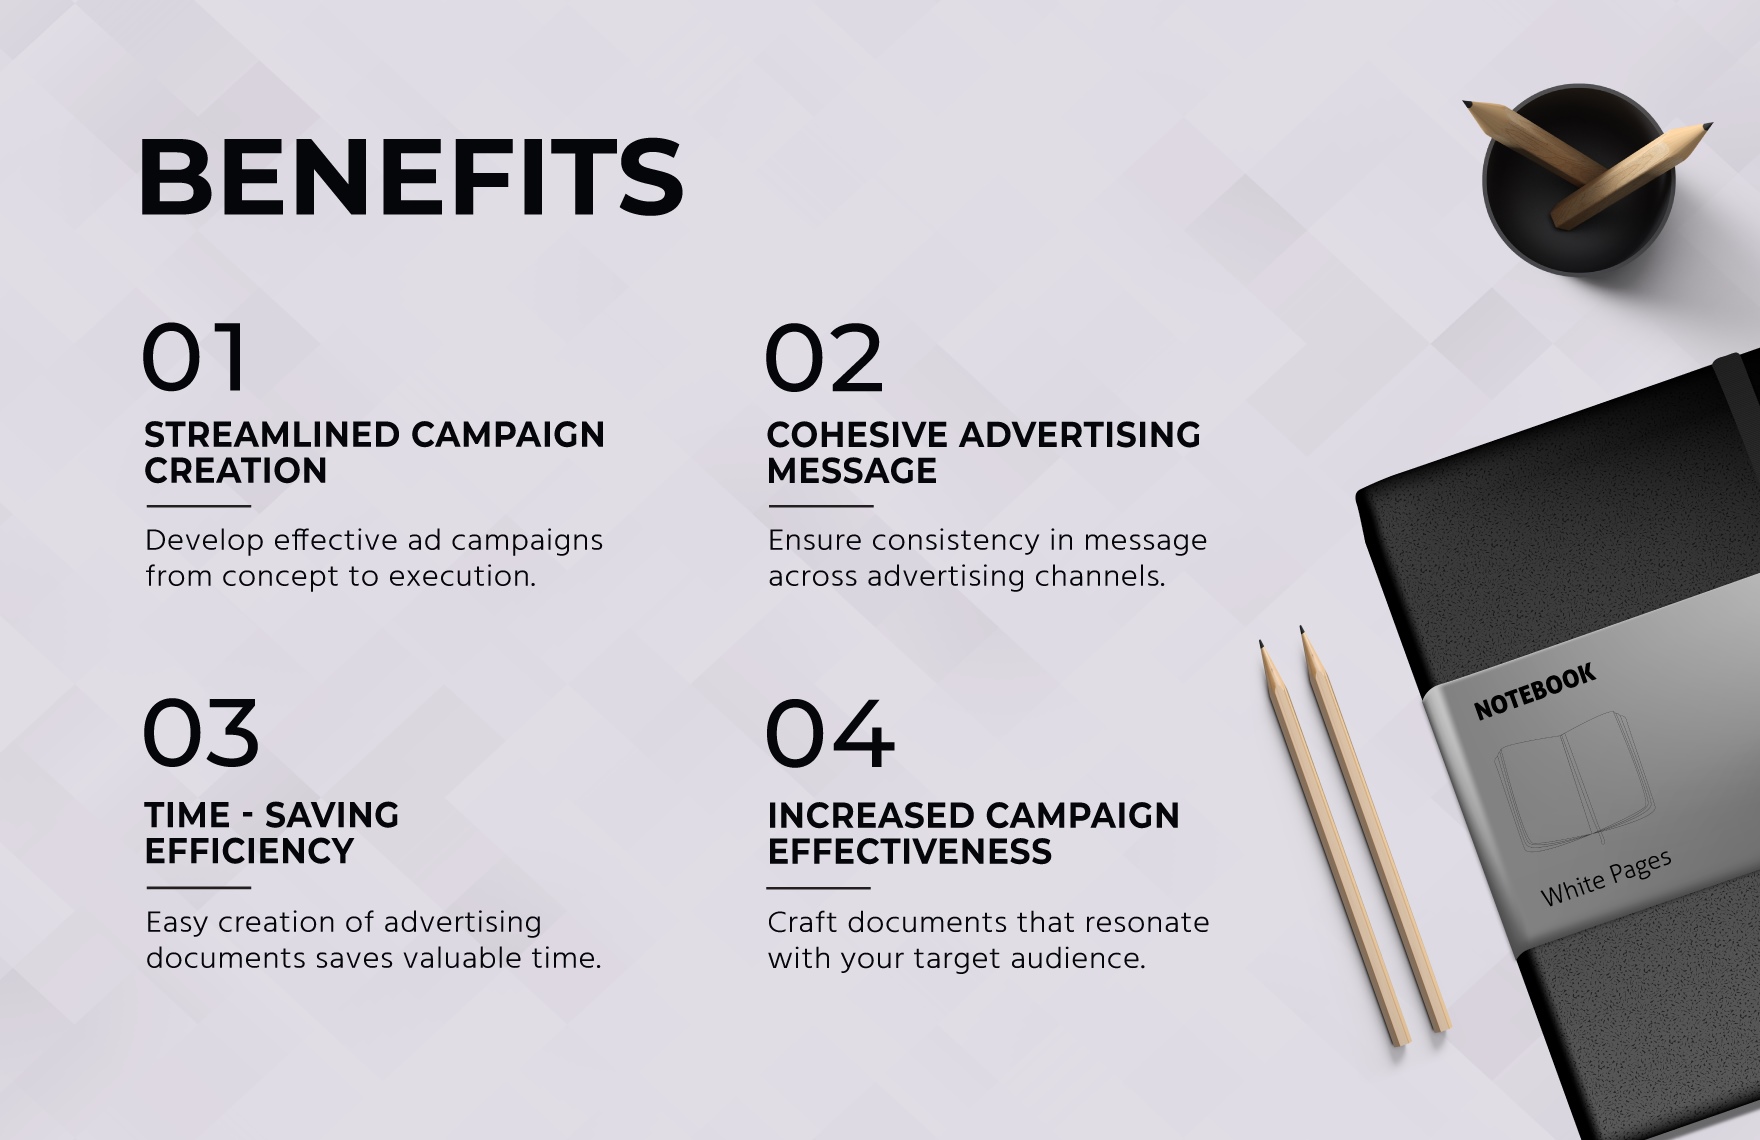 Influencer Campaign Quick Status Advertising Update Template